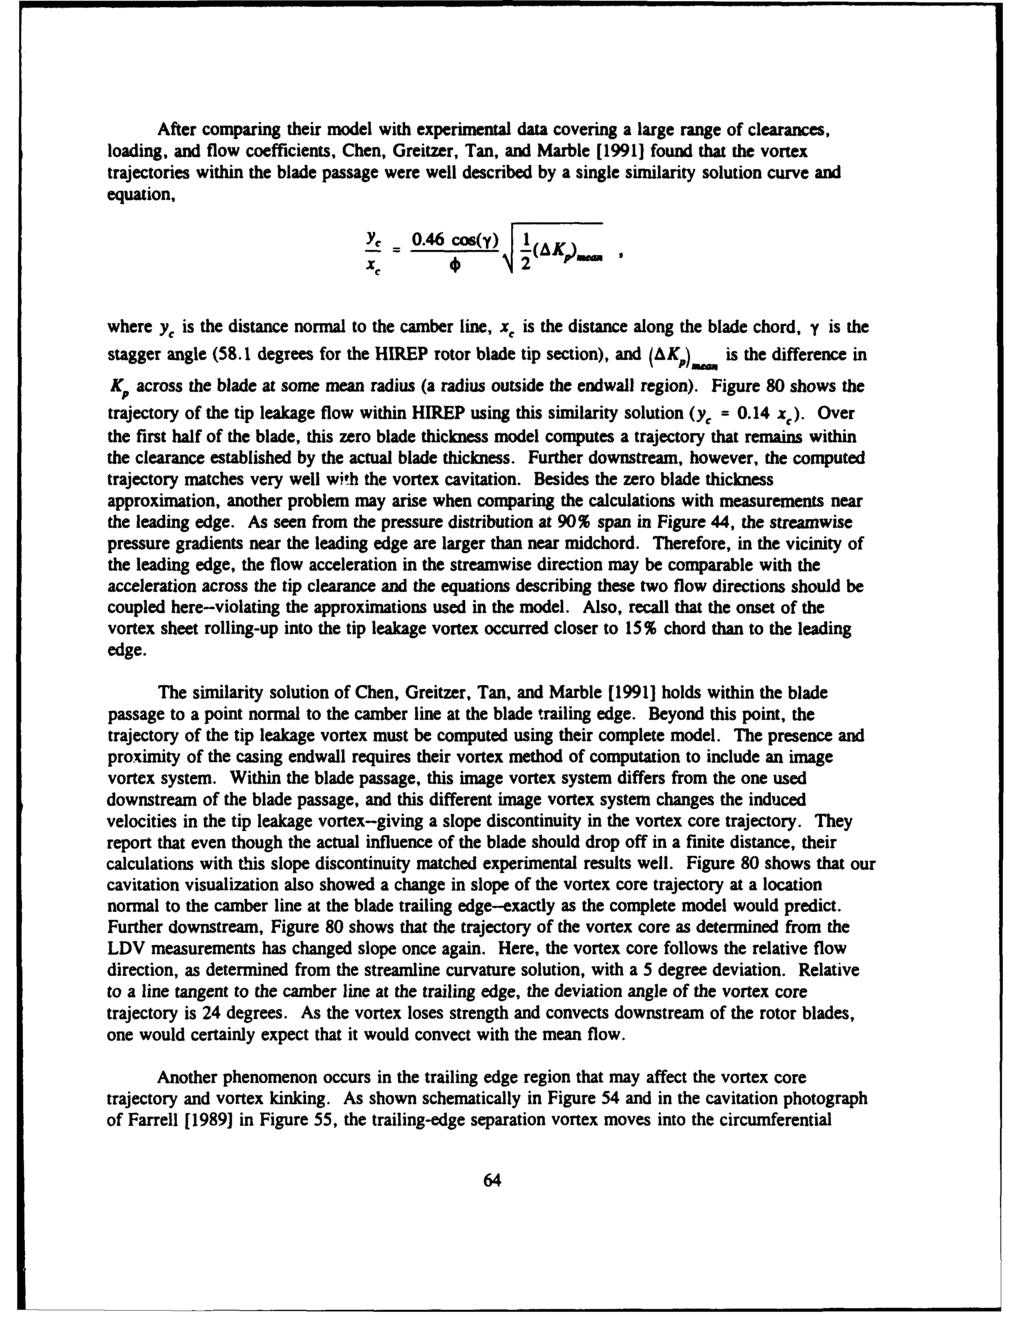 After comparing their model with experimental data covering a large range of clearances, loading, and flow coefficients, Chen, Greitzer, Tan, and Marble [1991] found that the vortex trajectories